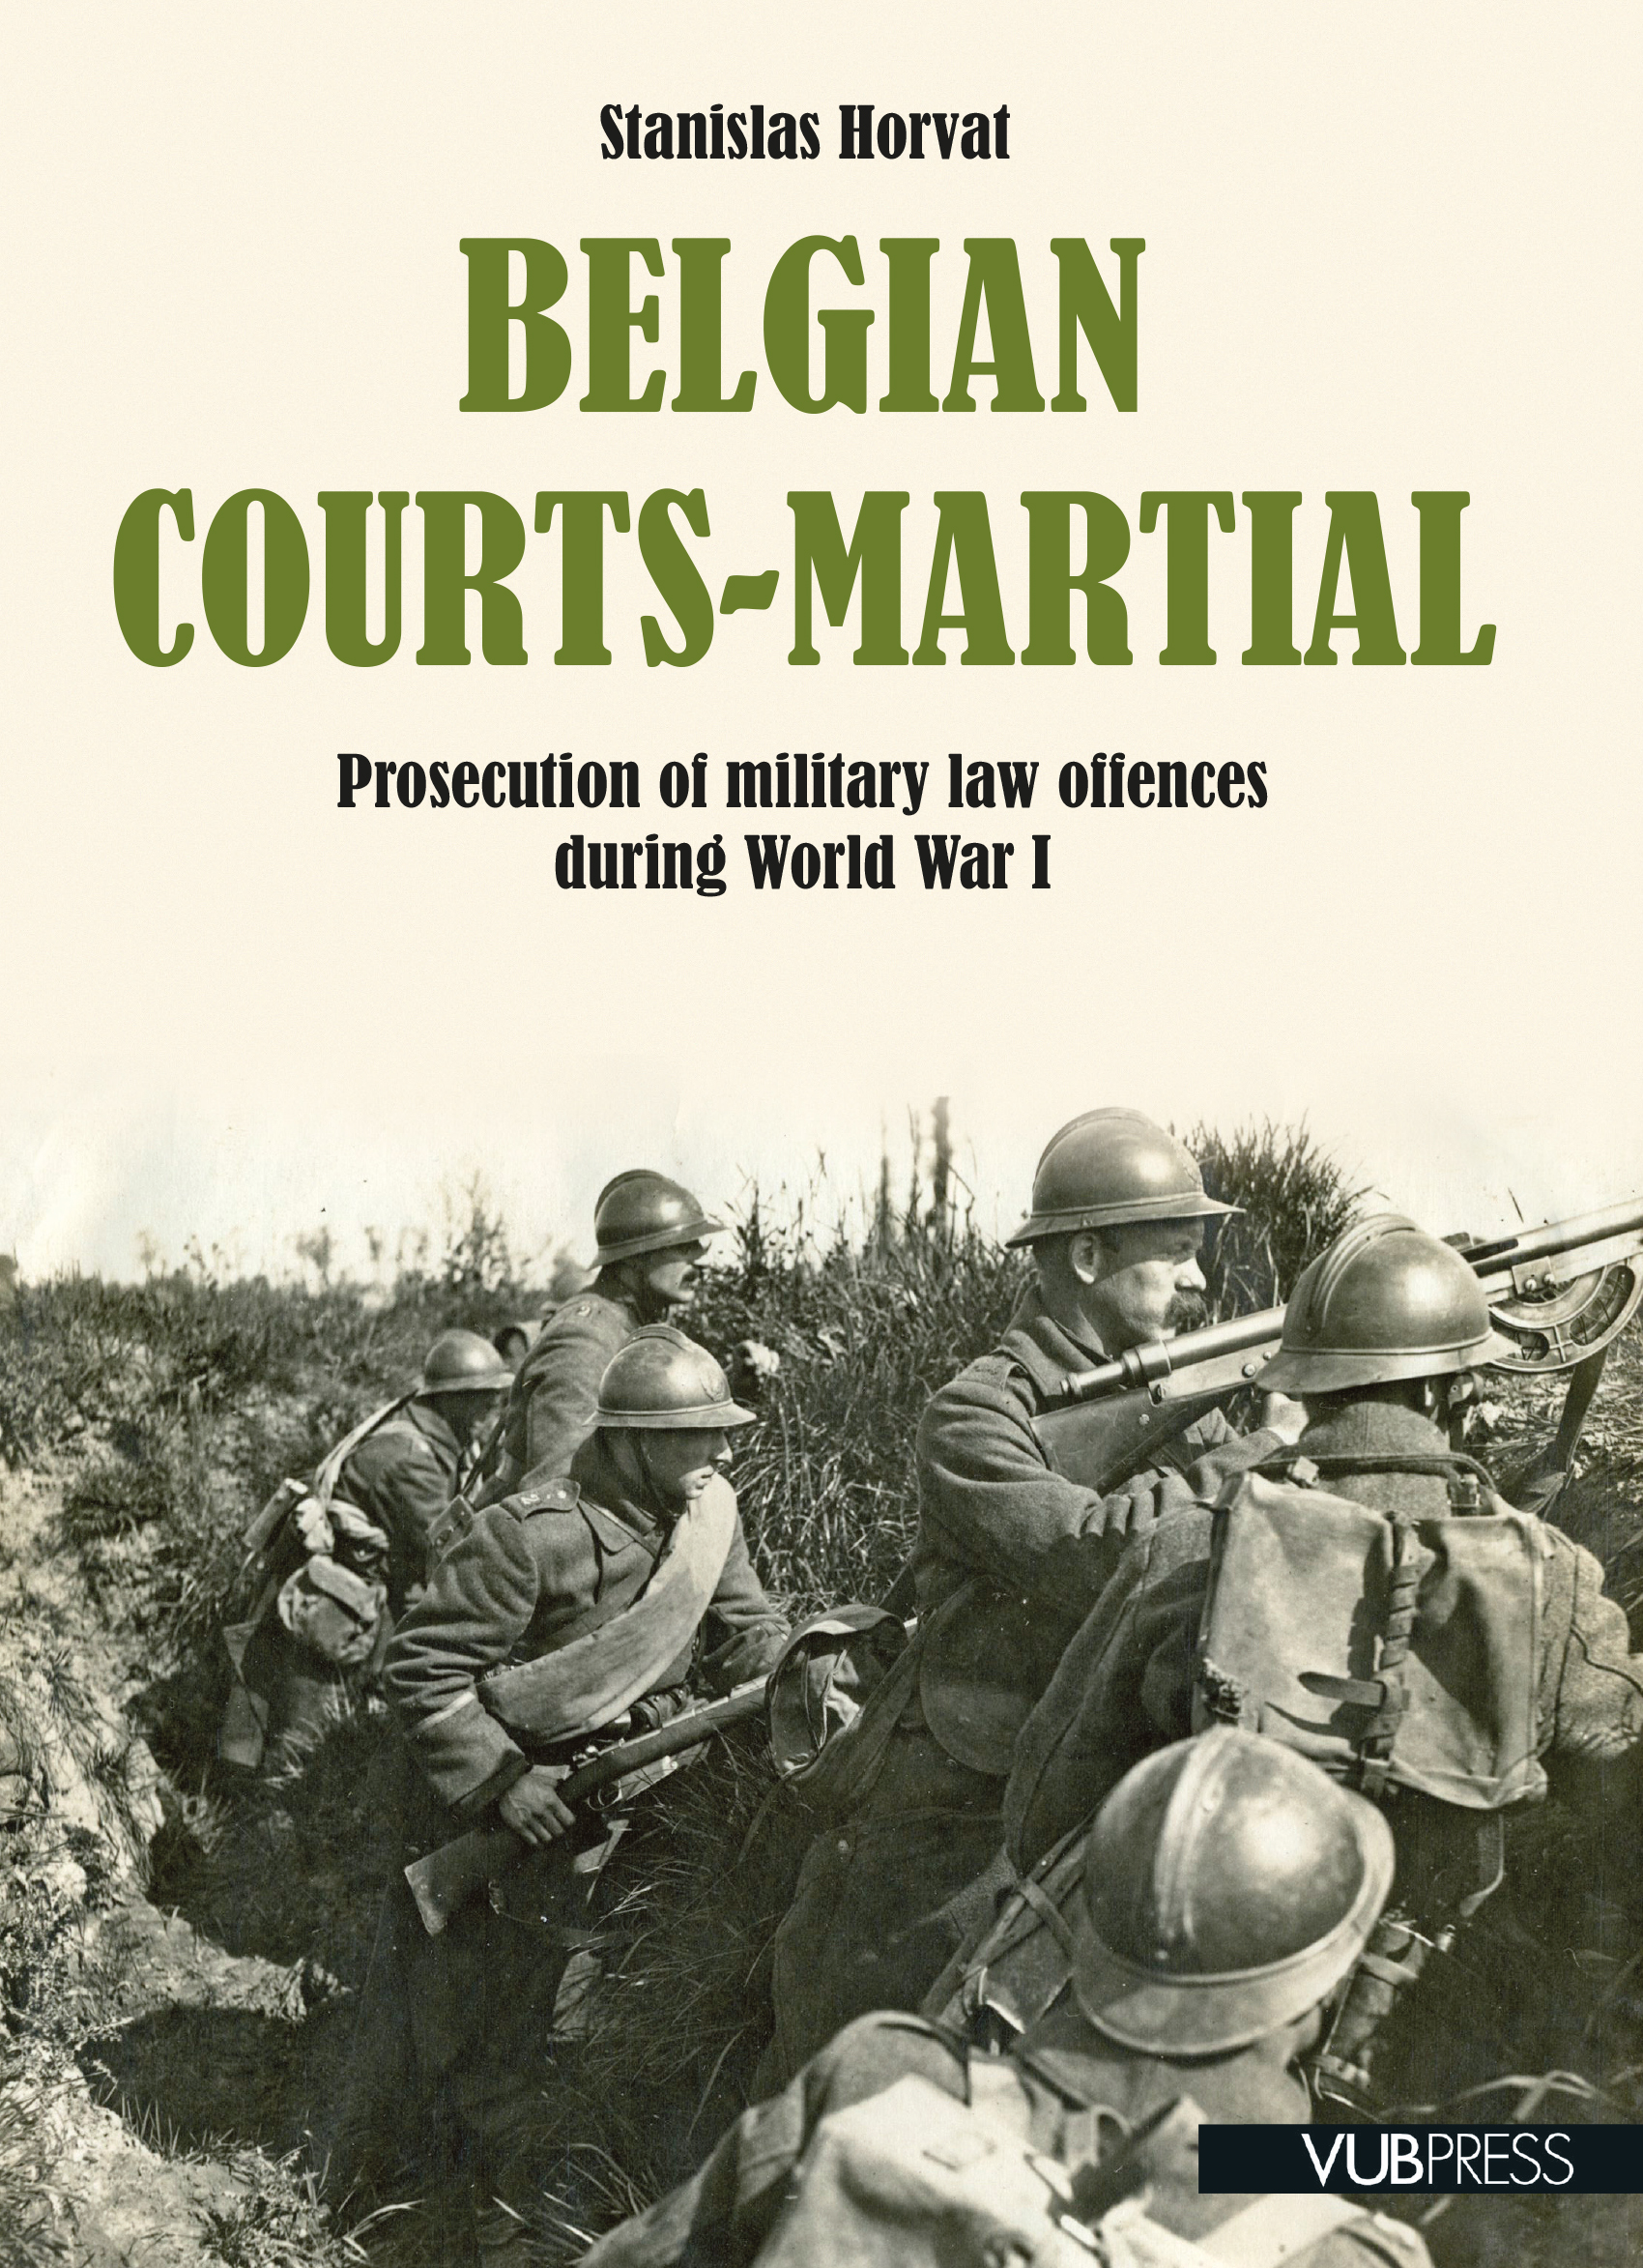 BELGIAN COURTS-MARTIAL. PROSECUTION OF MILITARY LAW OFFENCES DURING WORLD WAR I